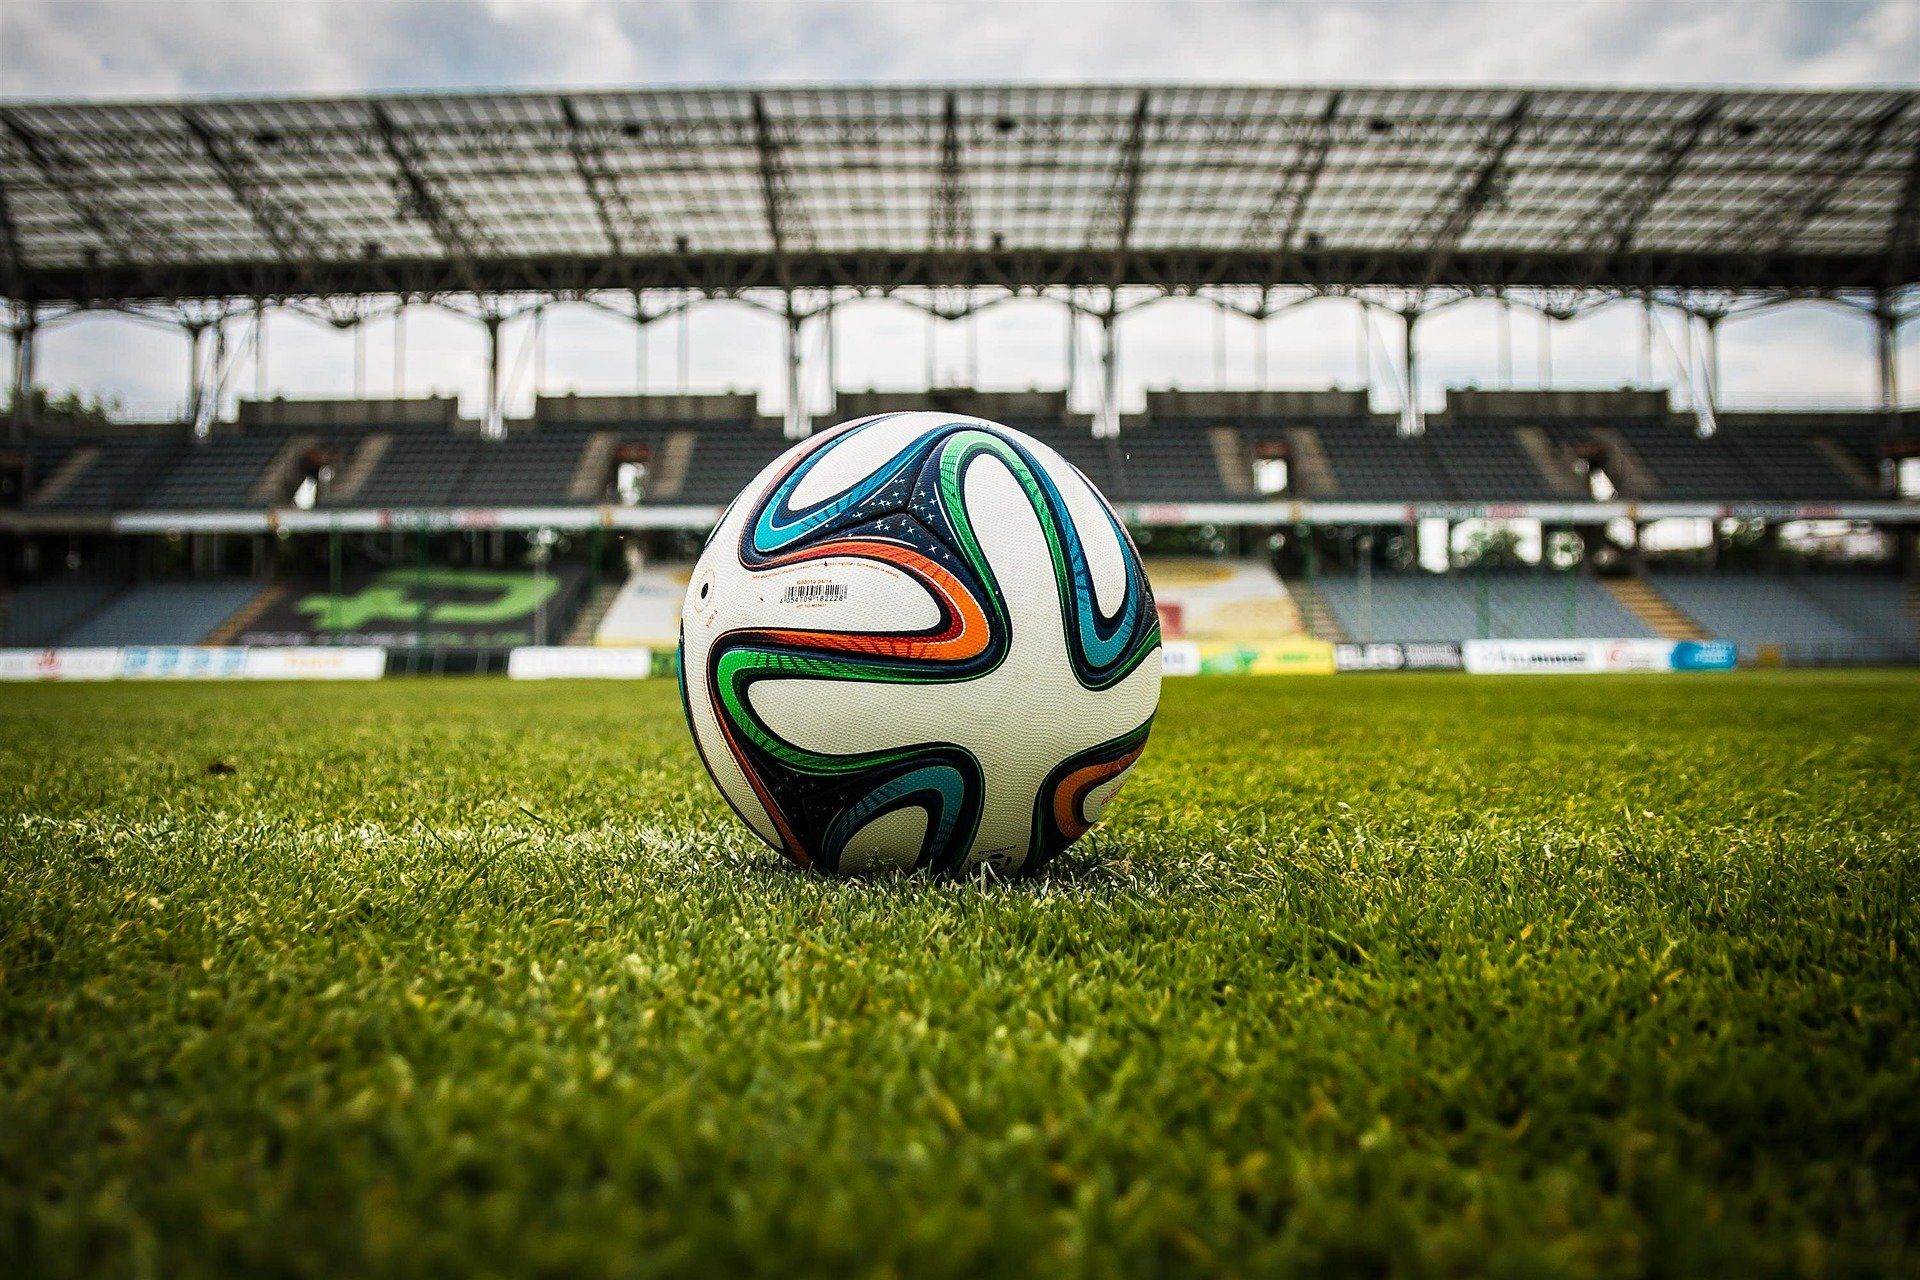 In a first, Indian company sponsors FIFA World Cup